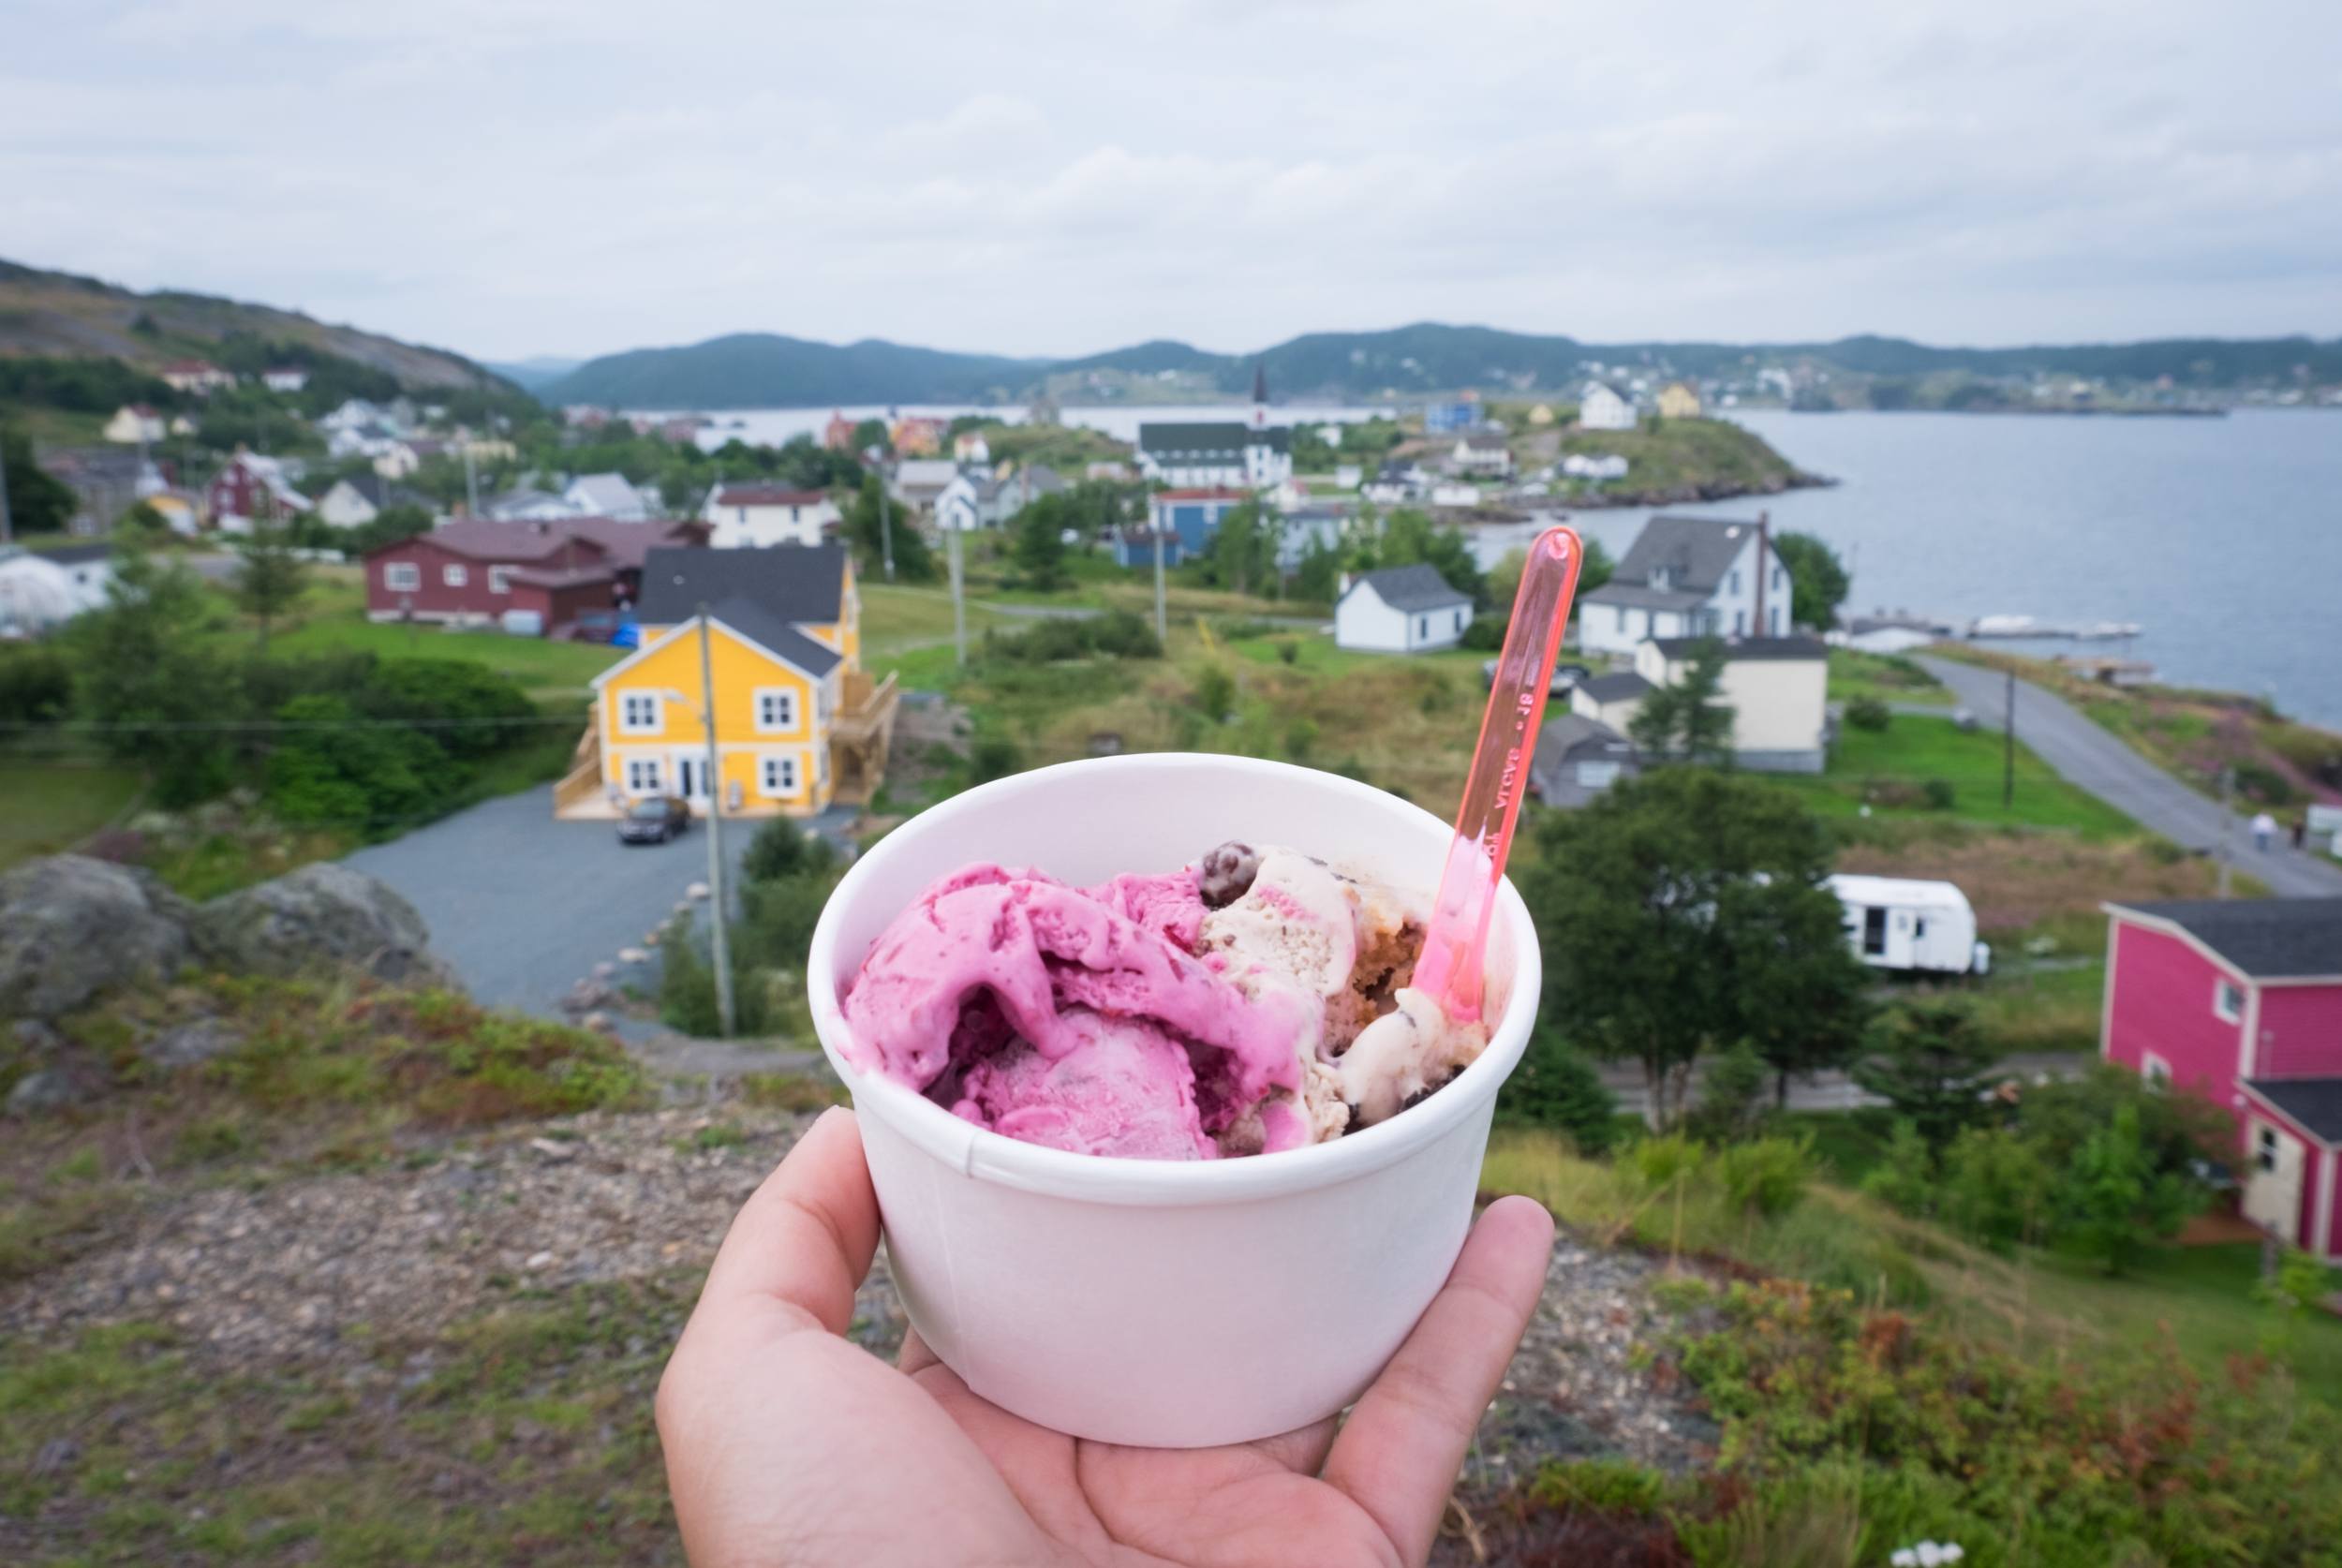 Kate holds a cup of purple partridgeberry ice cream in front of a panorama of the town of Trinity, still with brightly colored cottages but now under a cloudy sy.